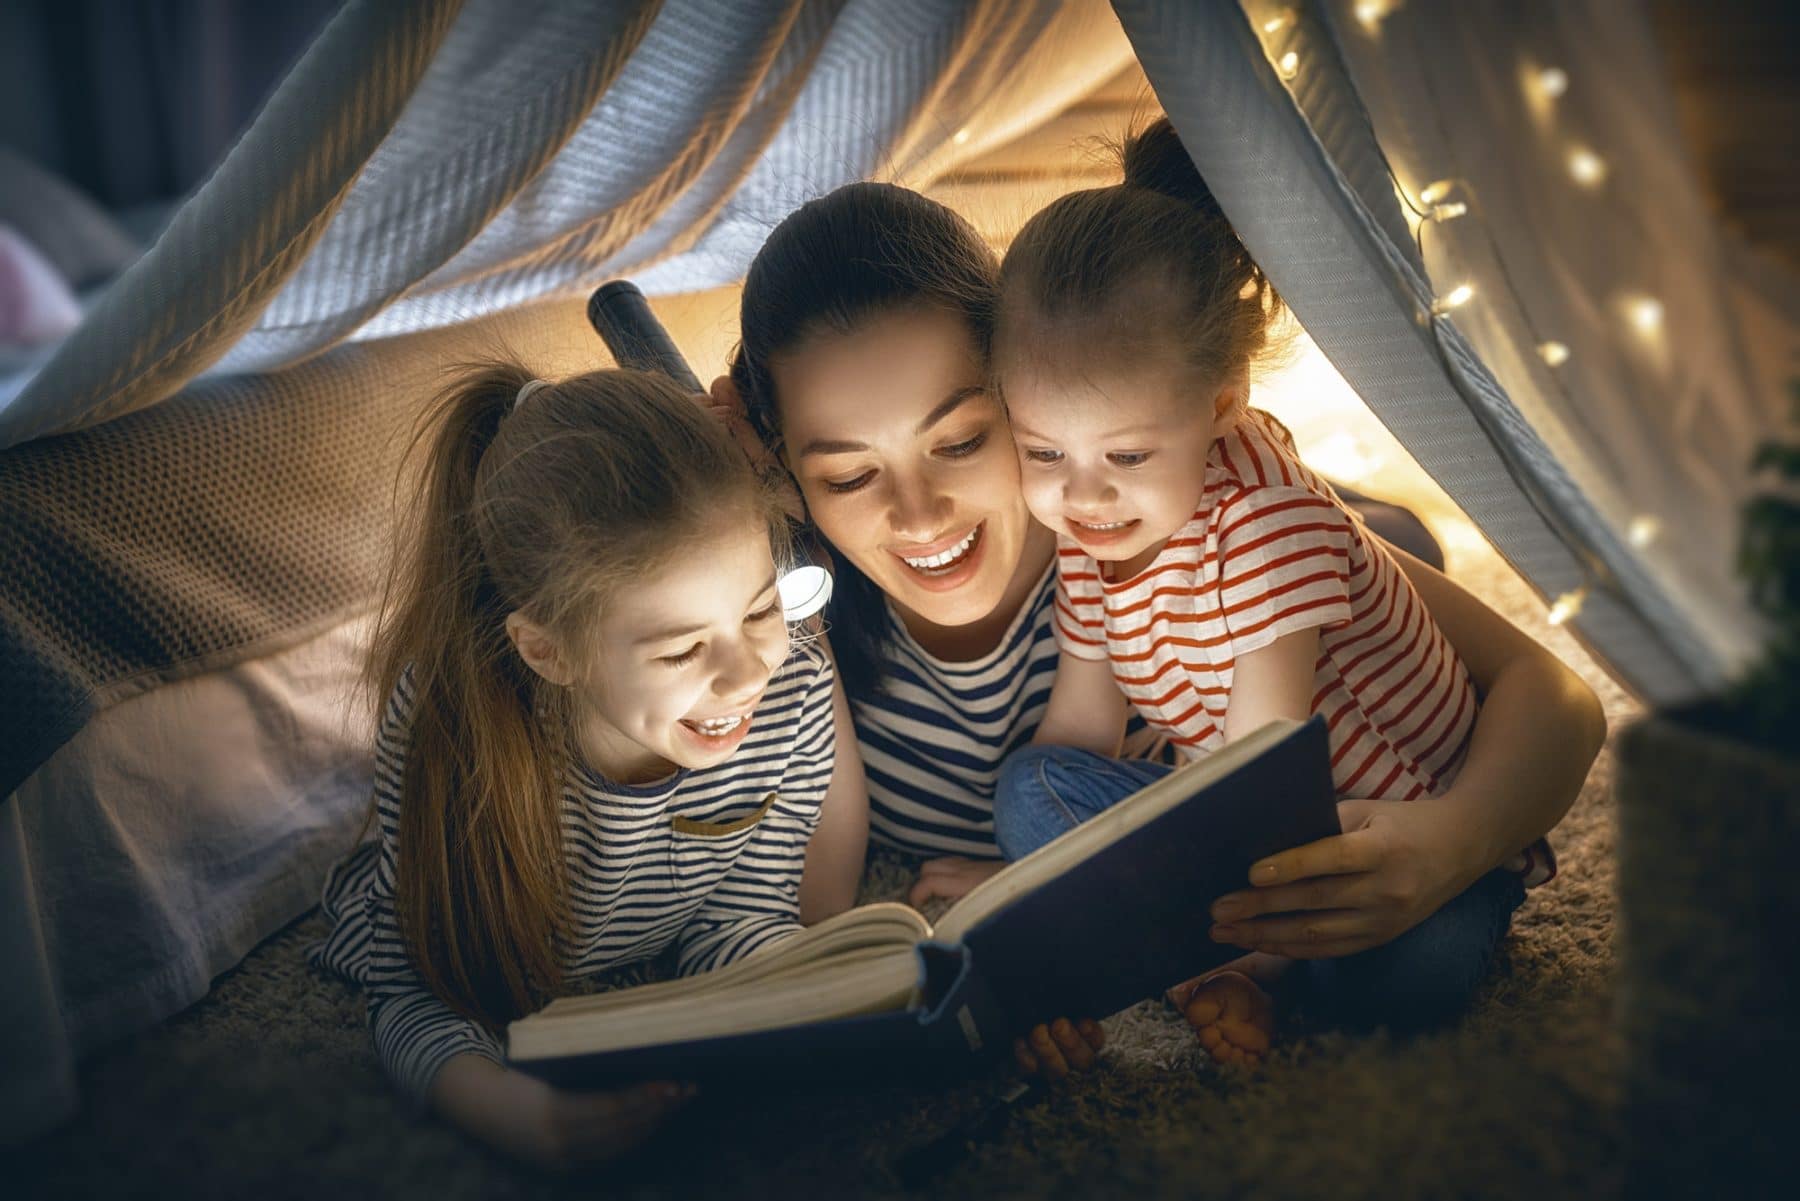 Mom and children reading book